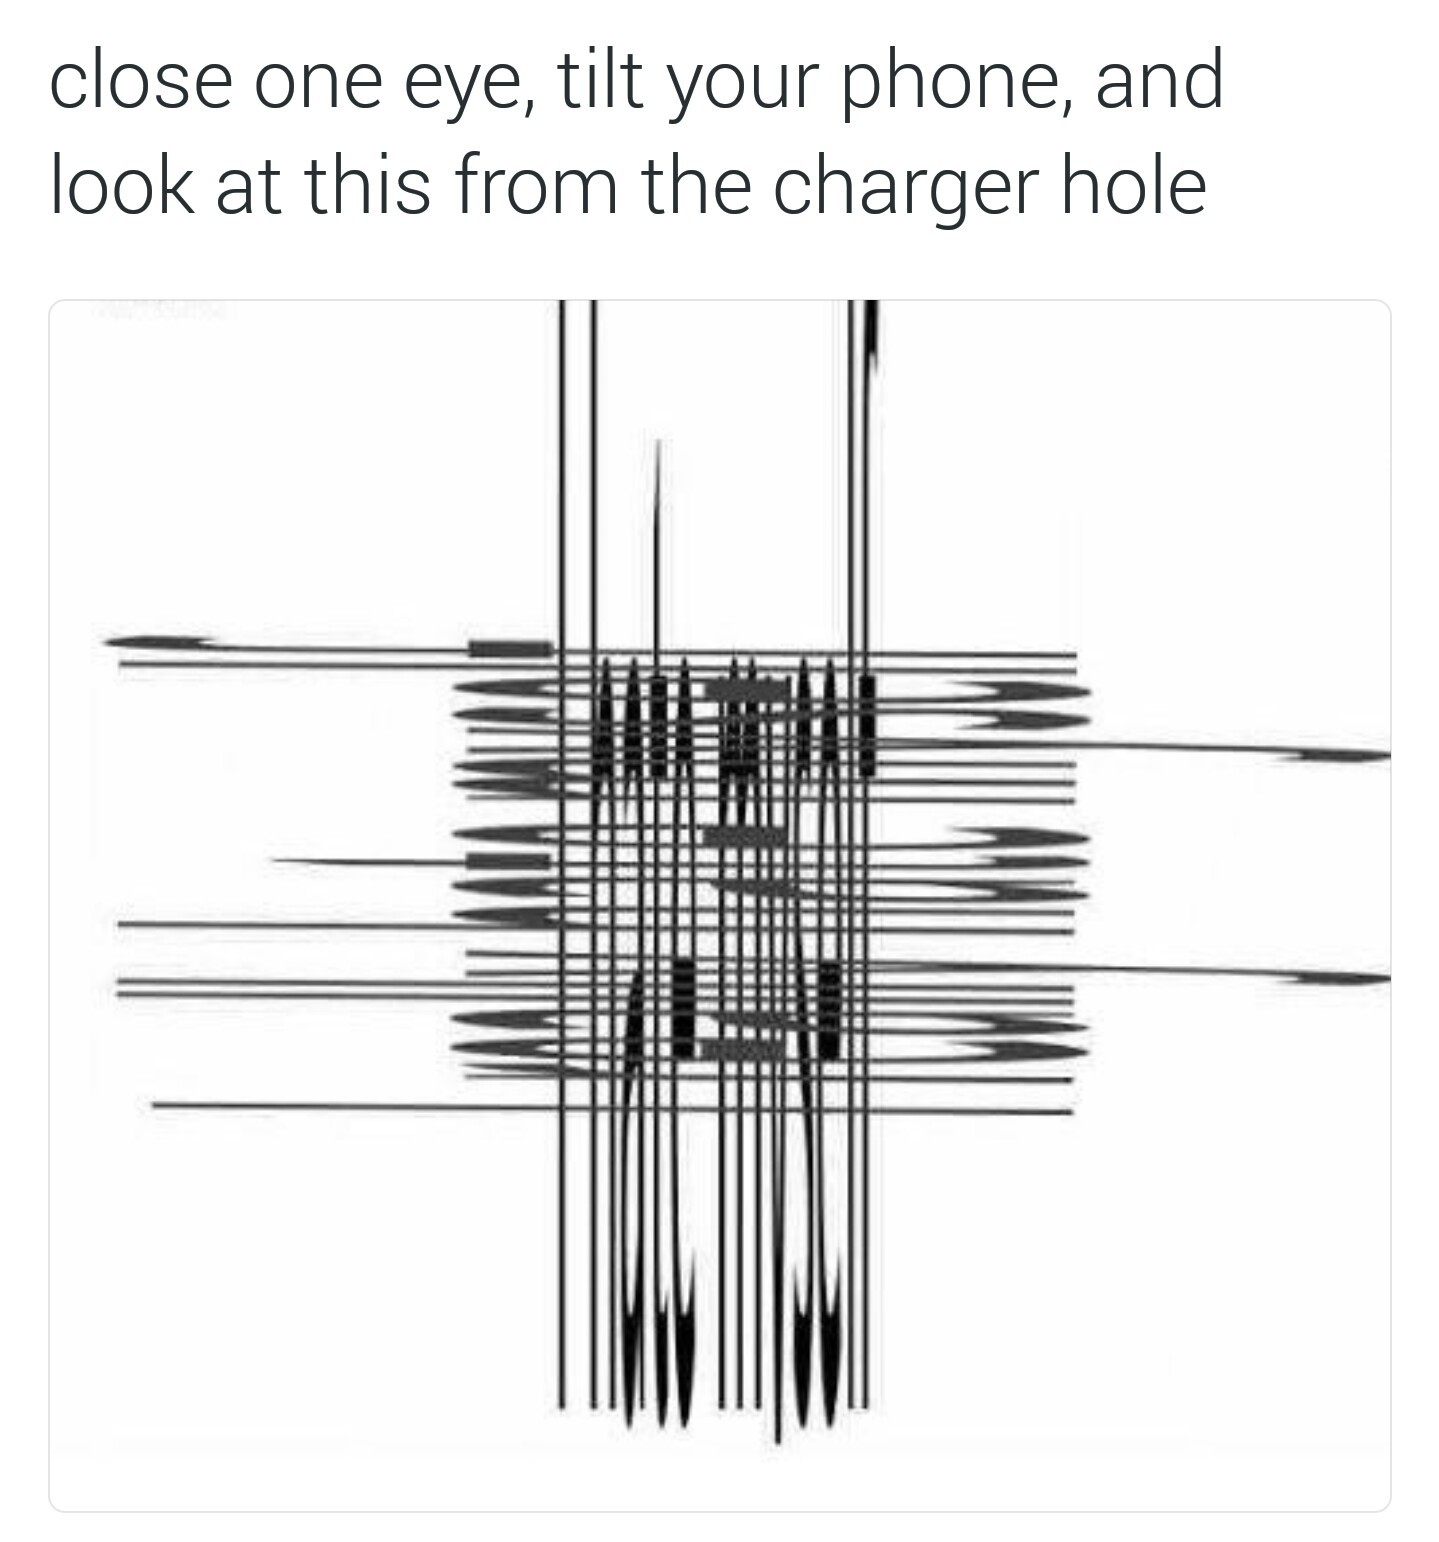 My neck, my back, lick my charger hole & crack - meme